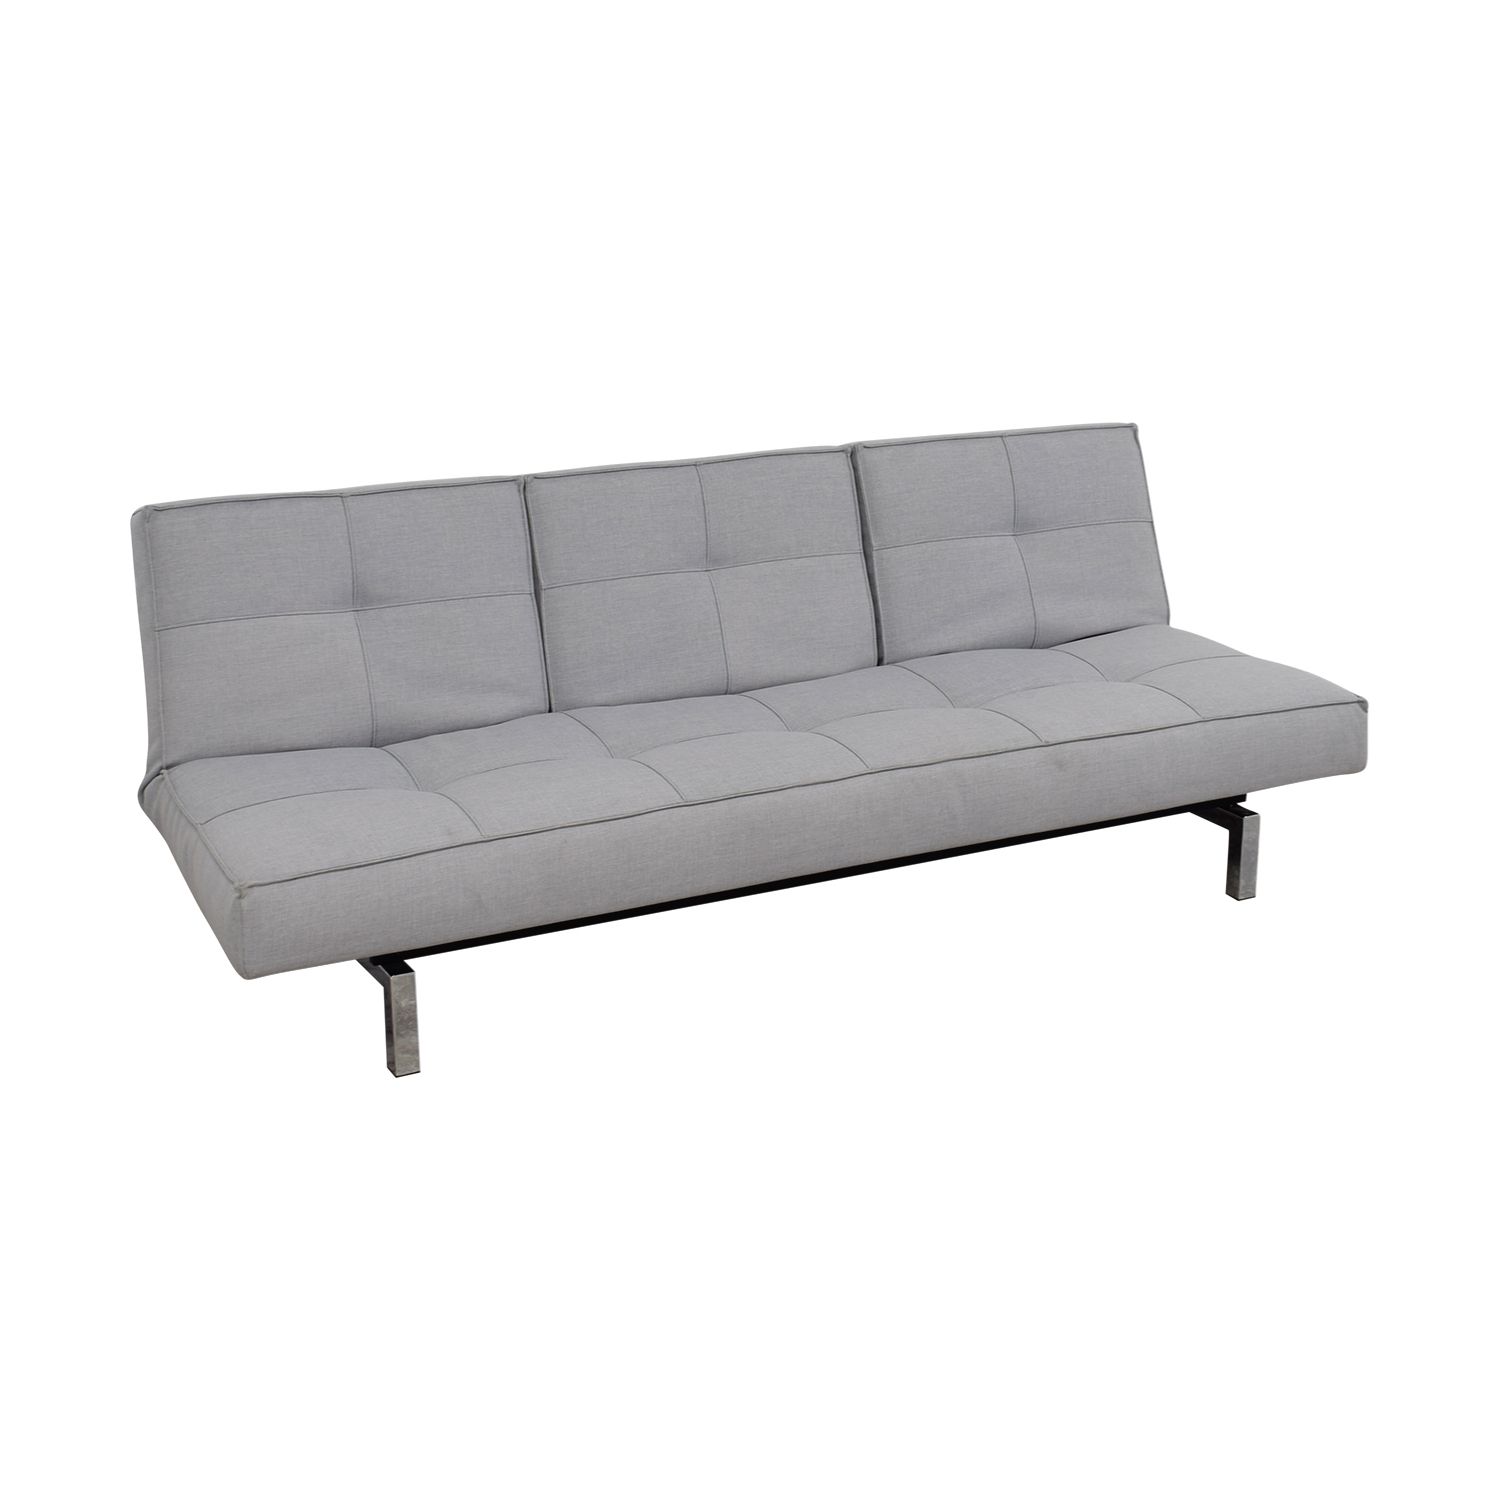 [%42% Off – Innovation Living Innovation Convertible Grey Tufted Sleeper With Preferred Tufted Convertible Sleeper Sofas|tufted Convertible Sleeper Sofas Throughout Well Known 42% Off – Innovation Living Innovation Convertible Grey Tufted Sleeper|most Recently Released Tufted Convertible Sleeper Sofas Regarding 42% Off – Innovation Living Innovation Convertible Grey Tufted Sleeper|most Recent 42% Off – Innovation Living Innovation Convertible Grey Tufted Sleeper Within Tufted Convertible Sleeper Sofas%] (View 11 of 15)